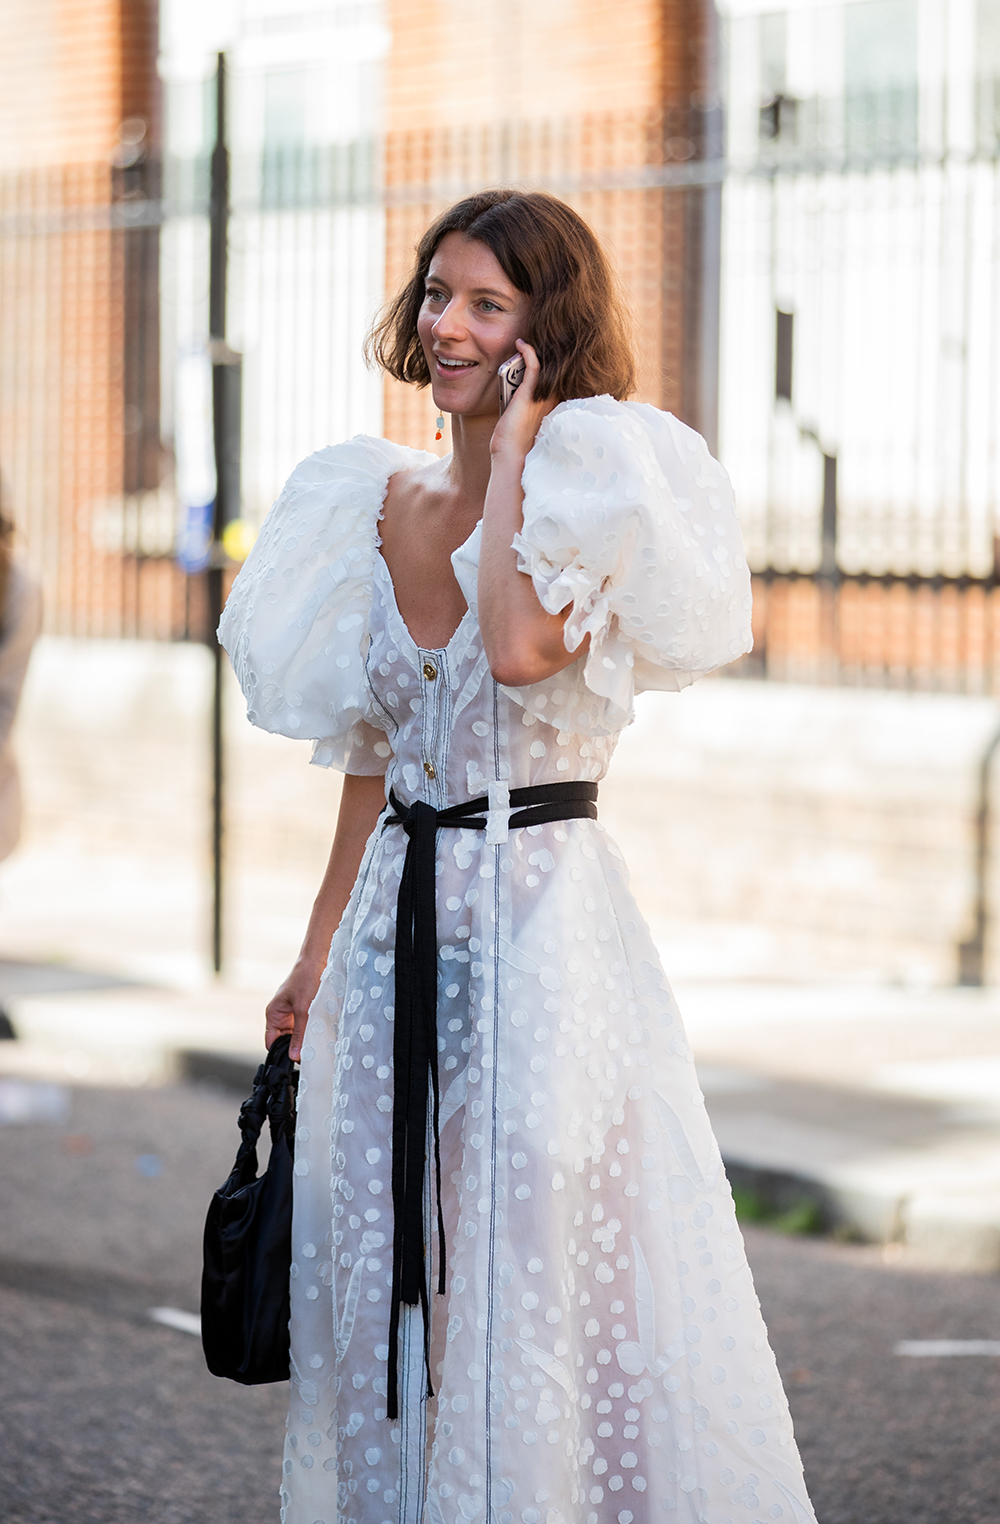 Puff Sleeve Dresses Are Trending All Over London Right Now | Who What ...